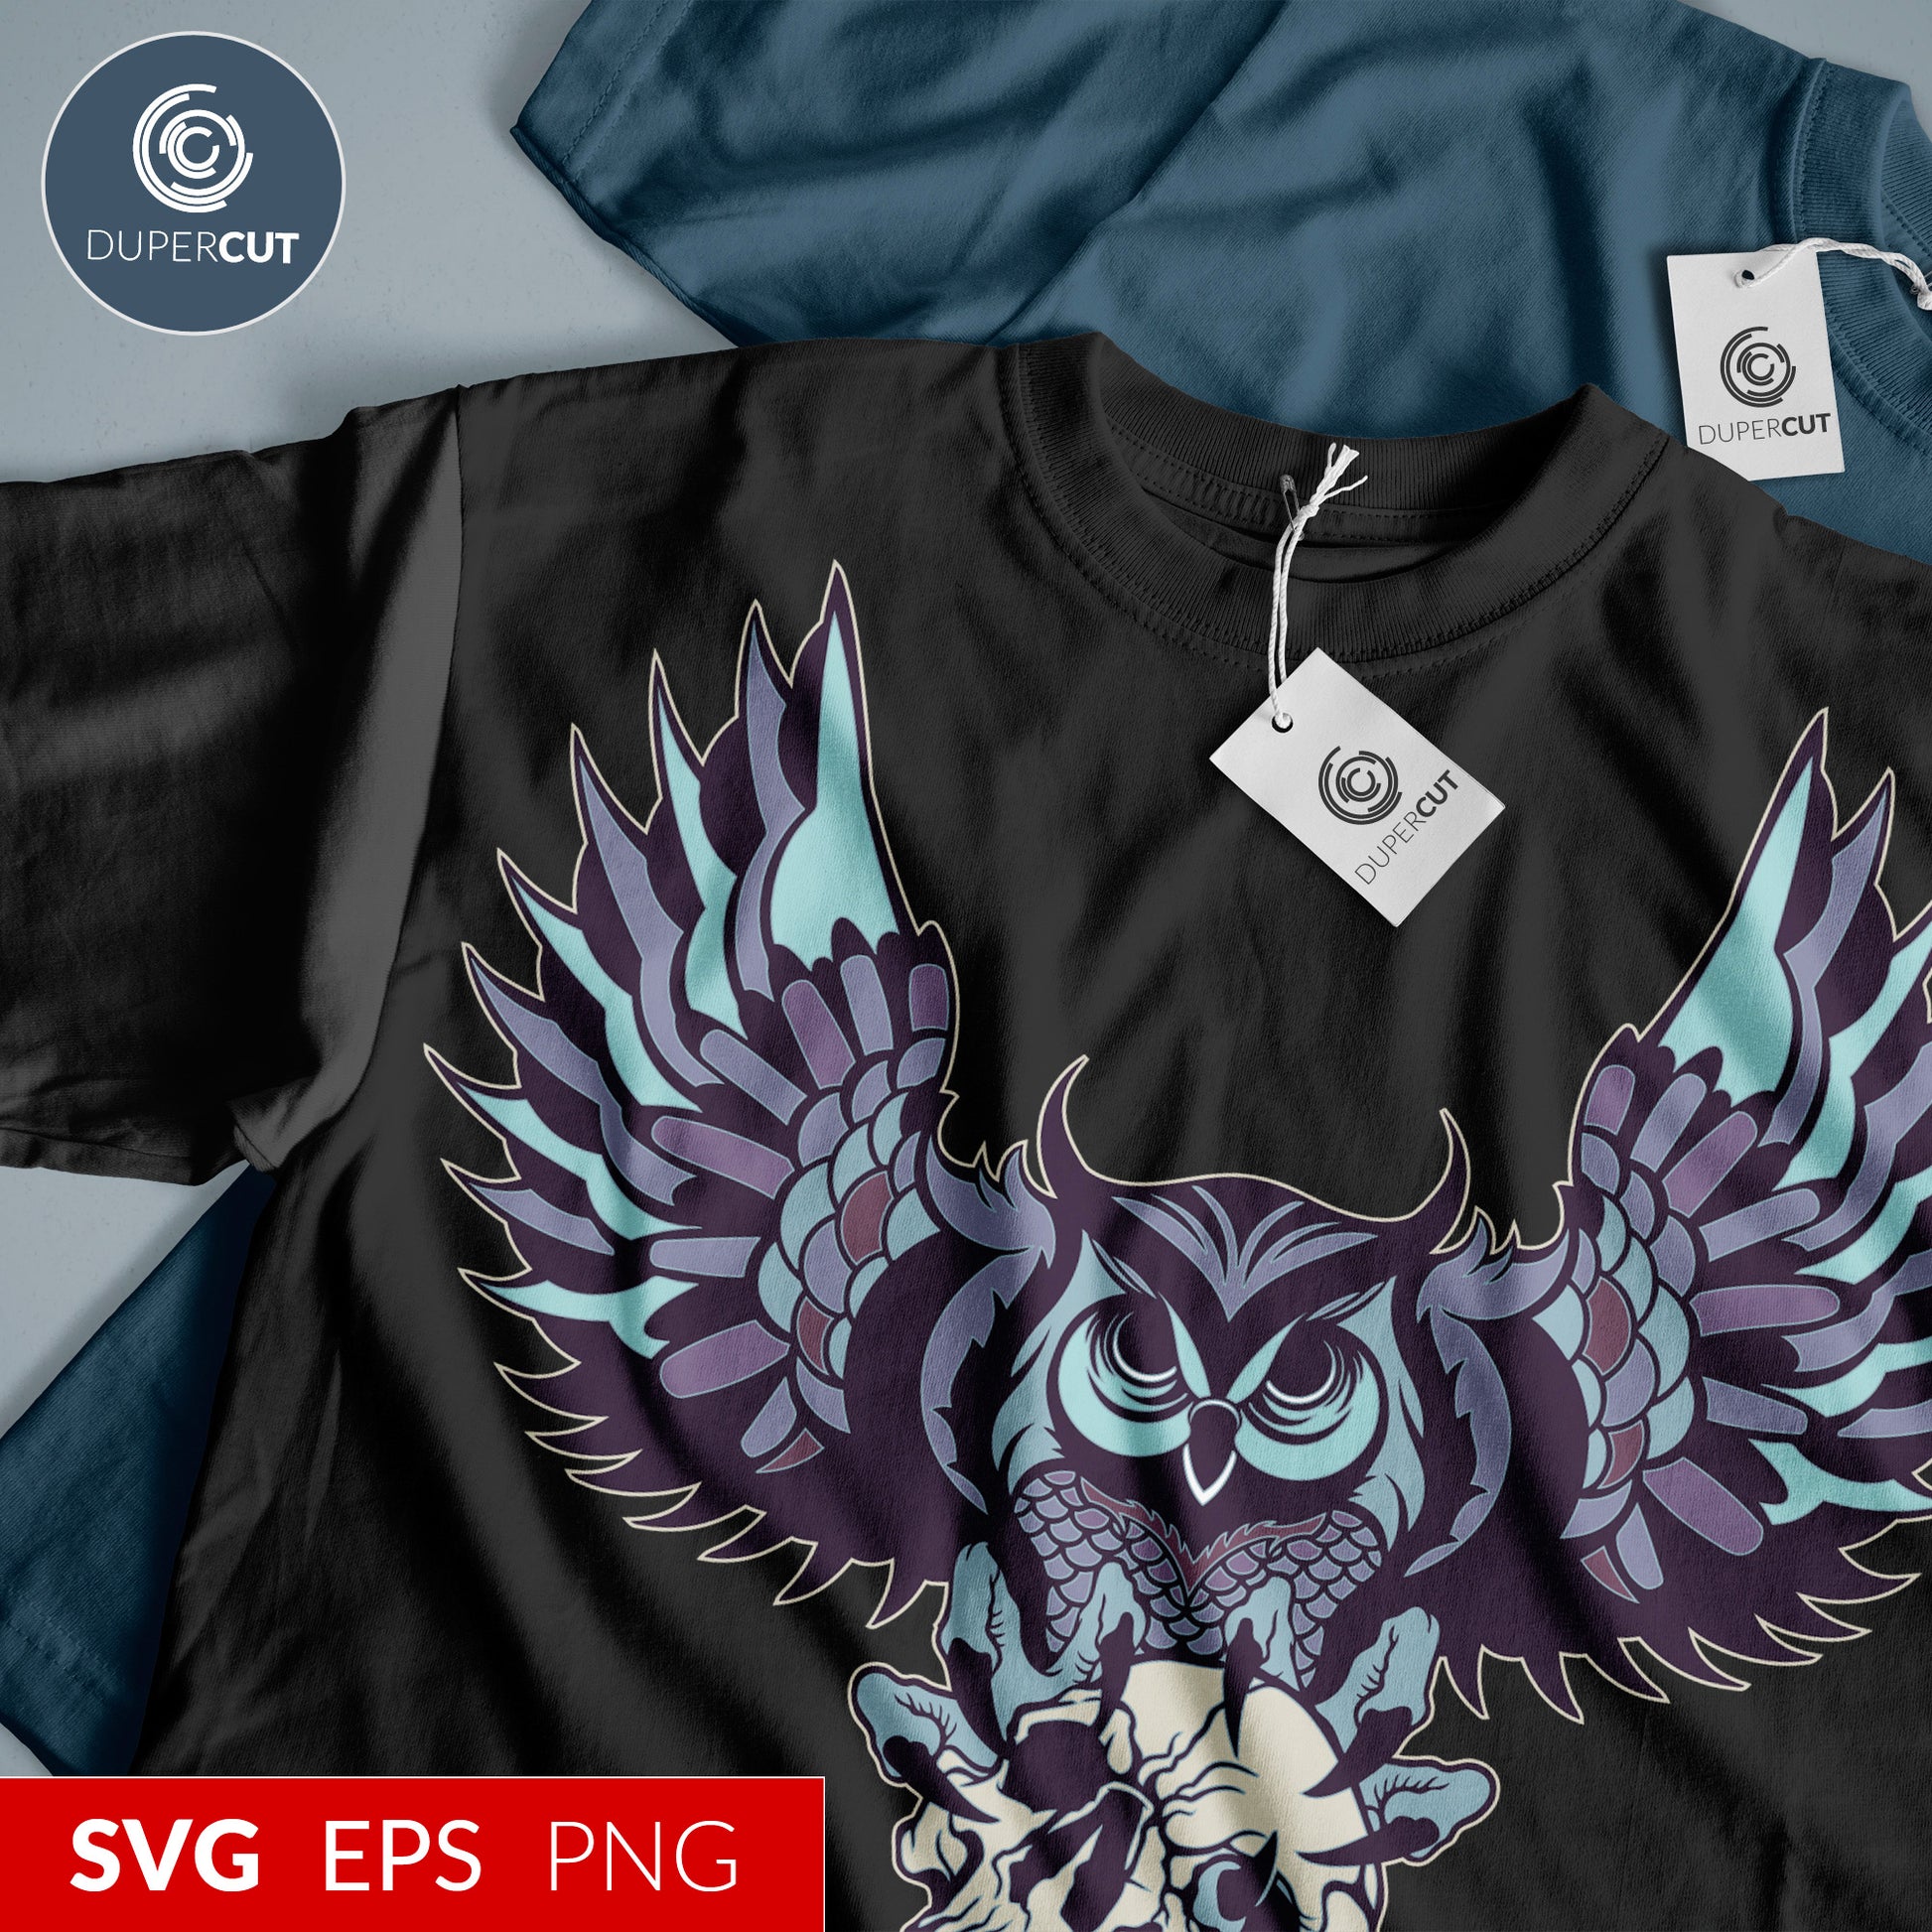 Flying owl - Custom apparel design, Amazon merch template - EPS, SVG, PNG files. Vector Colour illustration for print on demand, sublimation, custom t-shirts, hoodies, tumblers.